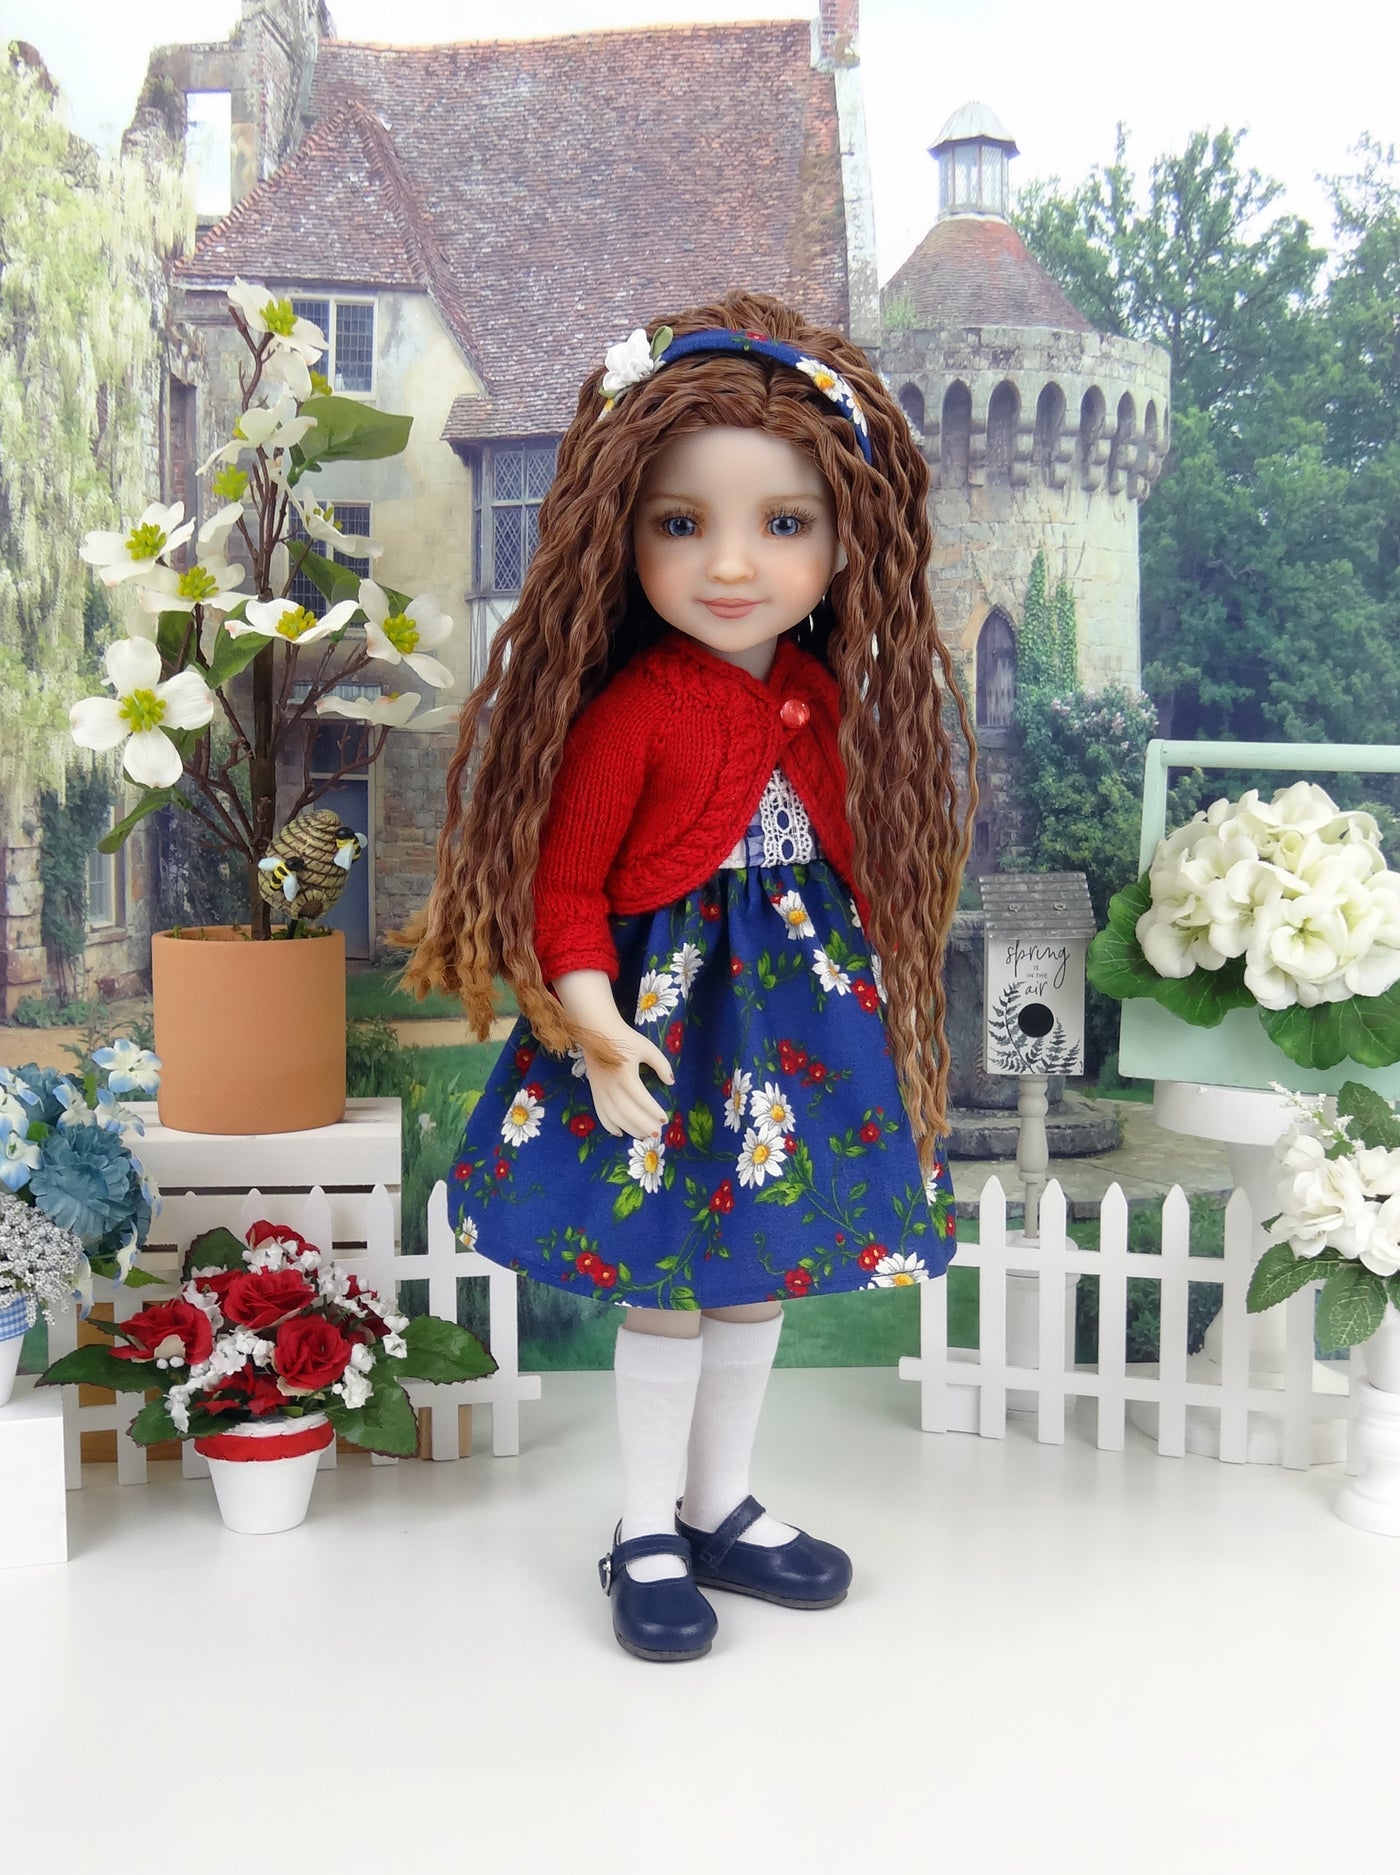 Darling Daisy - dress and sweater with shoes for Ruby Red Fashion Friends doll